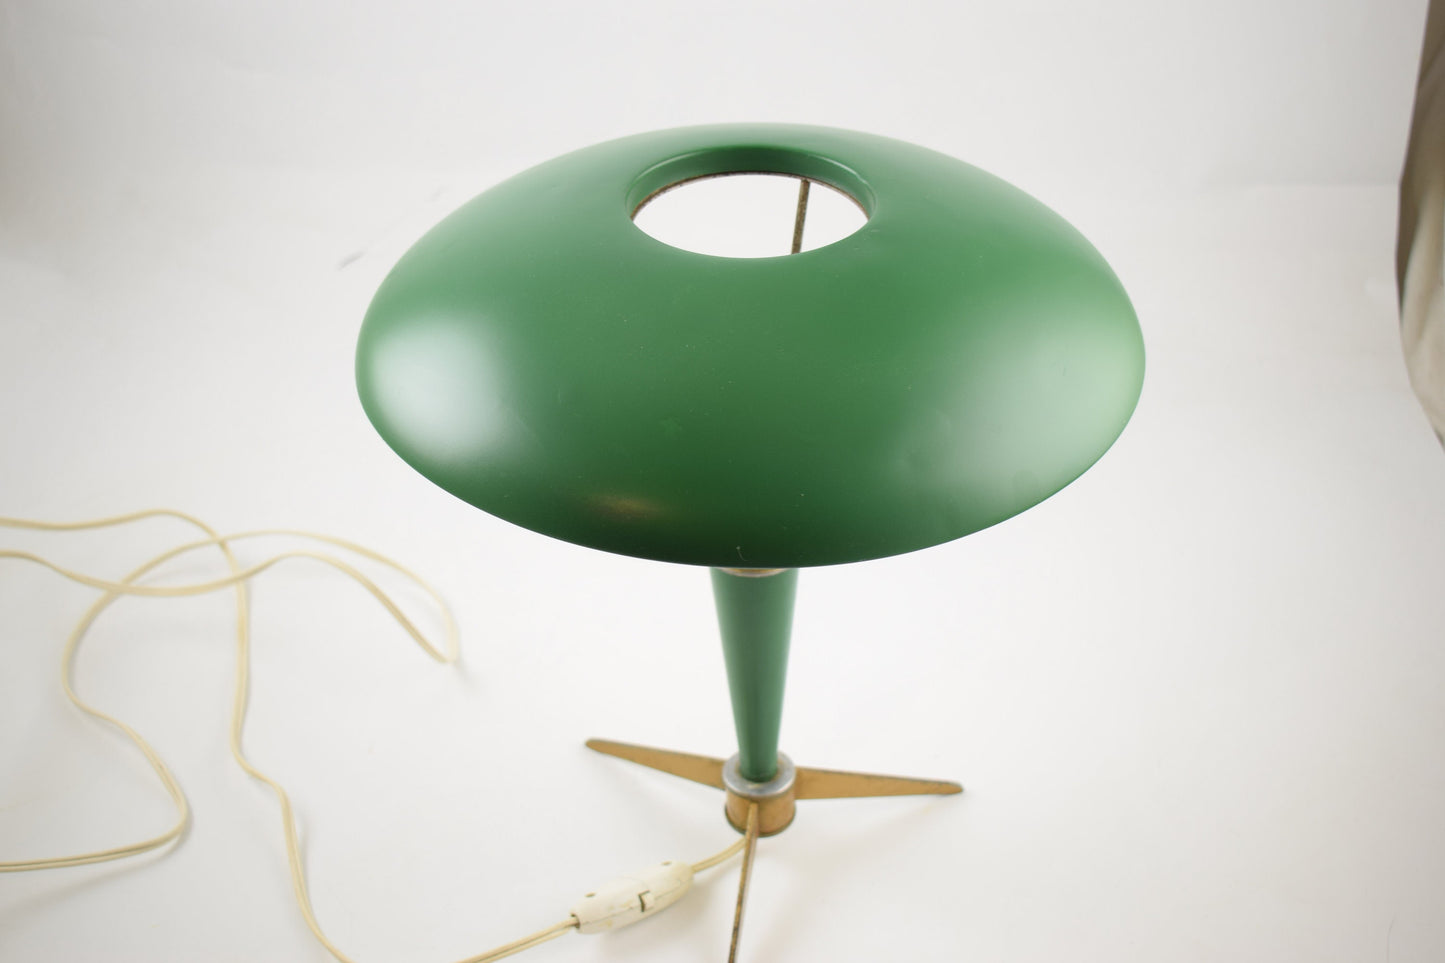 Louis Kalff table lamp philips " bijou" industrial design from the 1950s